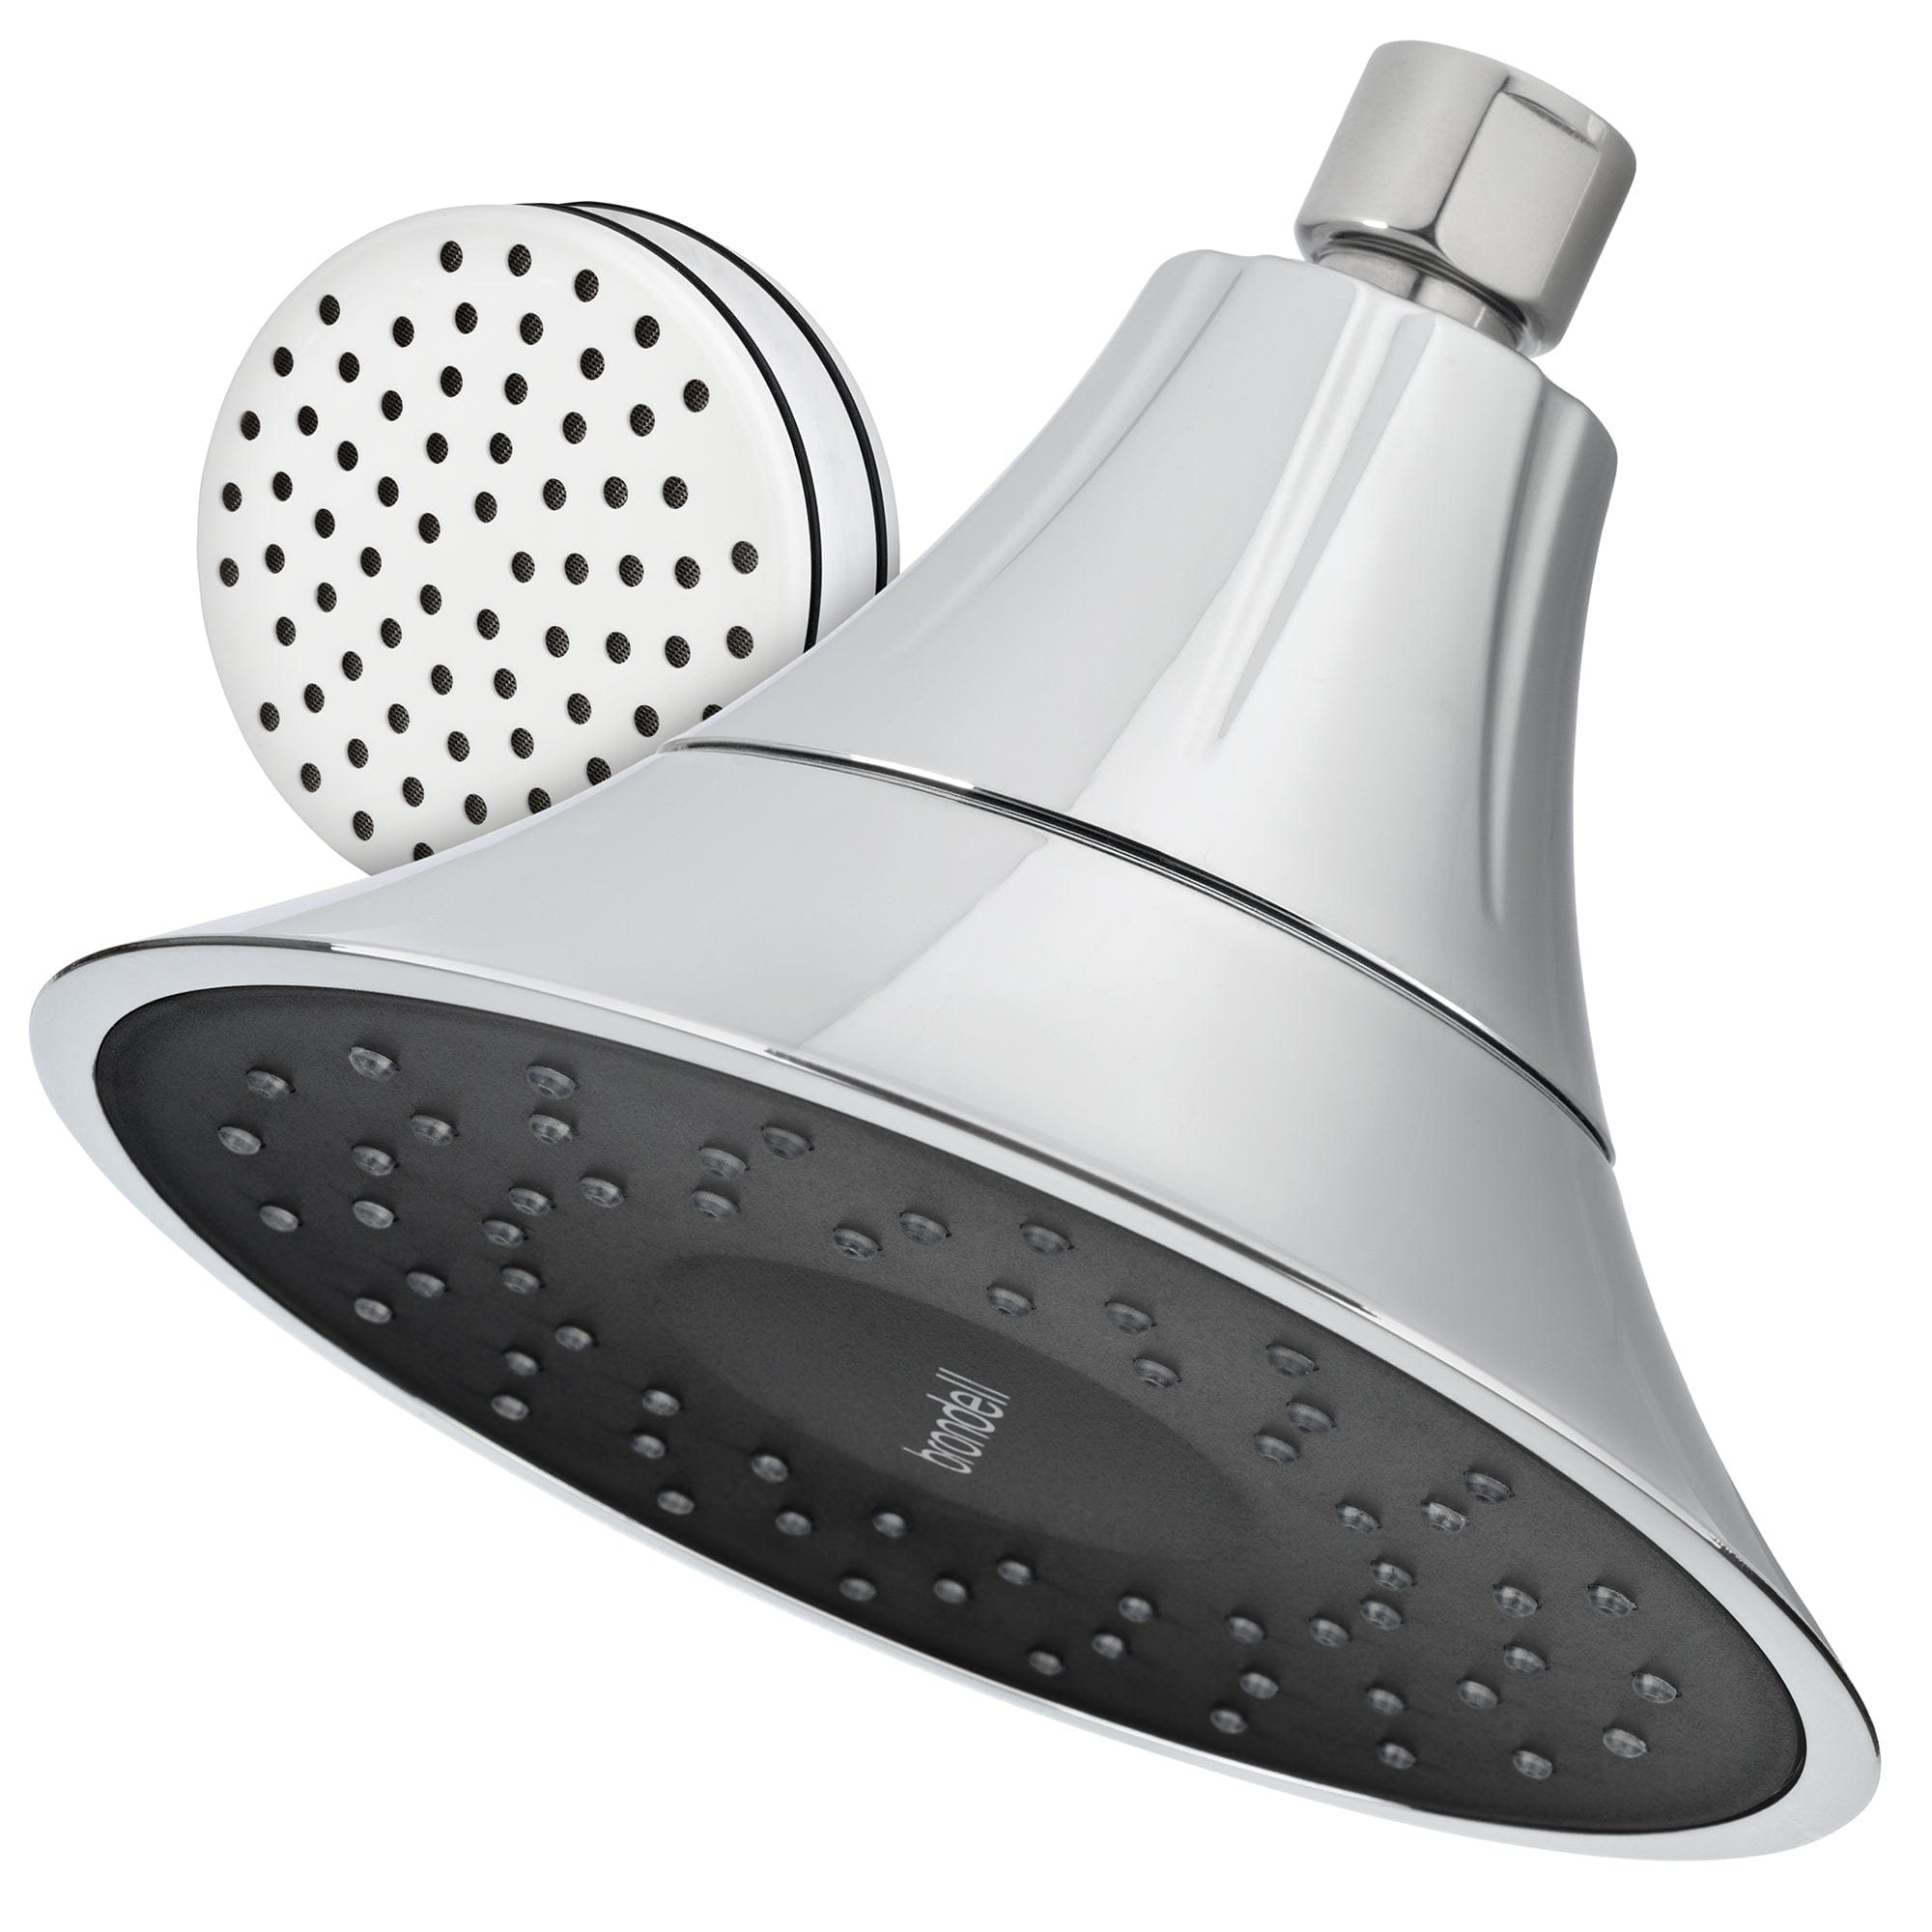 VivaSpring Filtered Showerhead in Chrome with Obsidian Face - Molaix819911012718VIVASPRING FILTERED SHOWER HEADFSH25-CB